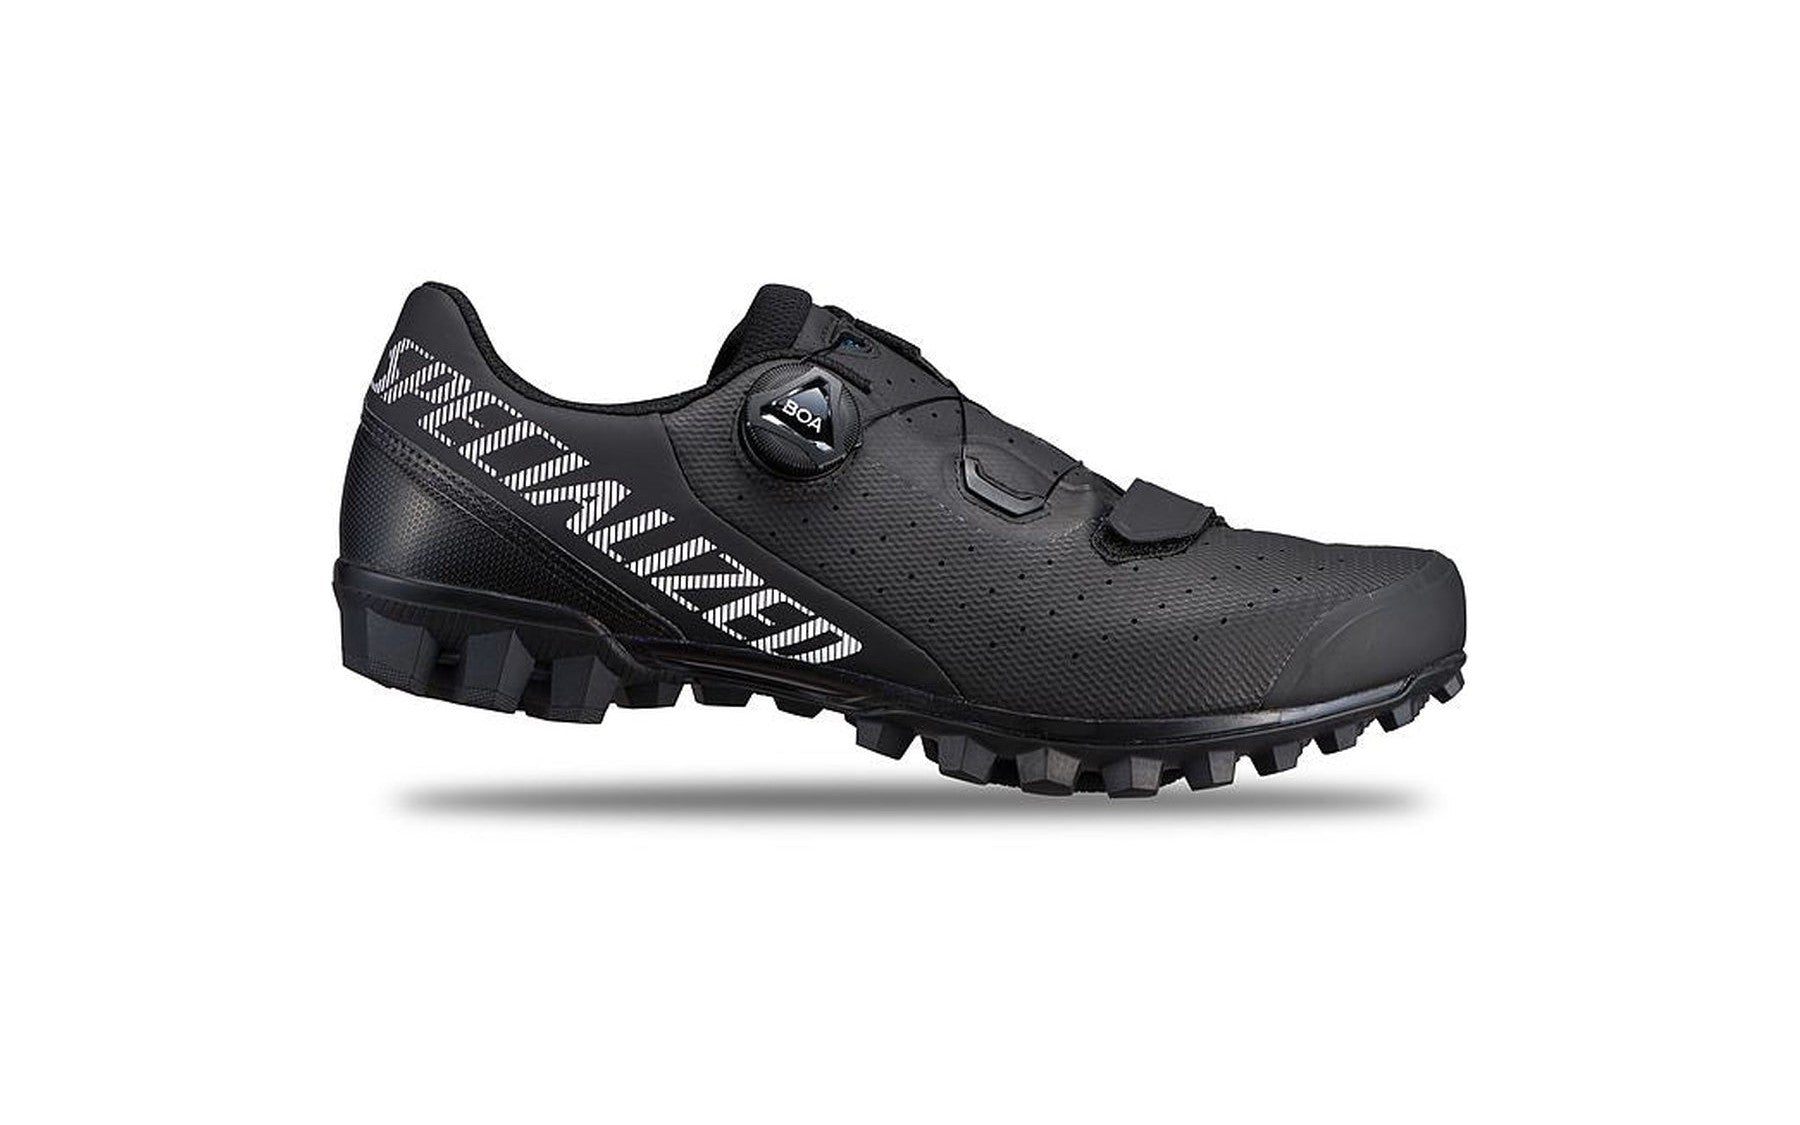 Recon 2.0 Mountain Bike Shoes-Specialized